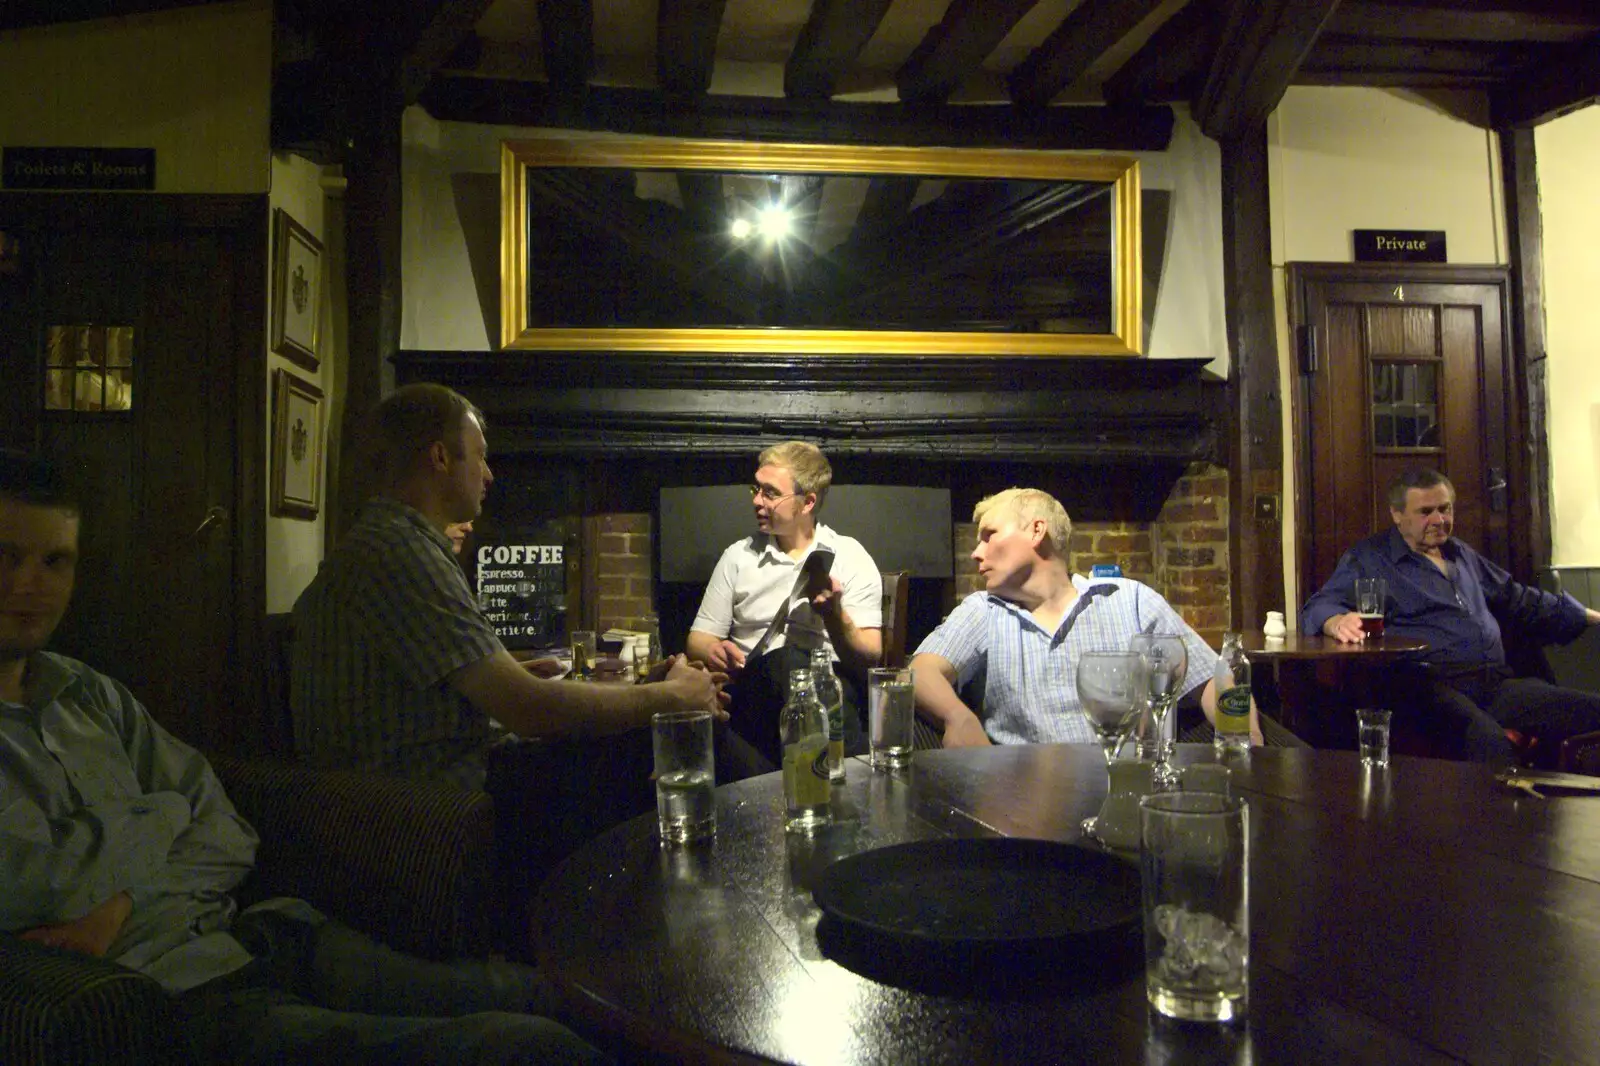 The late-night crowd, from The BSCC Weekend Away, Buckden, St. Neots, Huntingdonshire - 15th May 2010